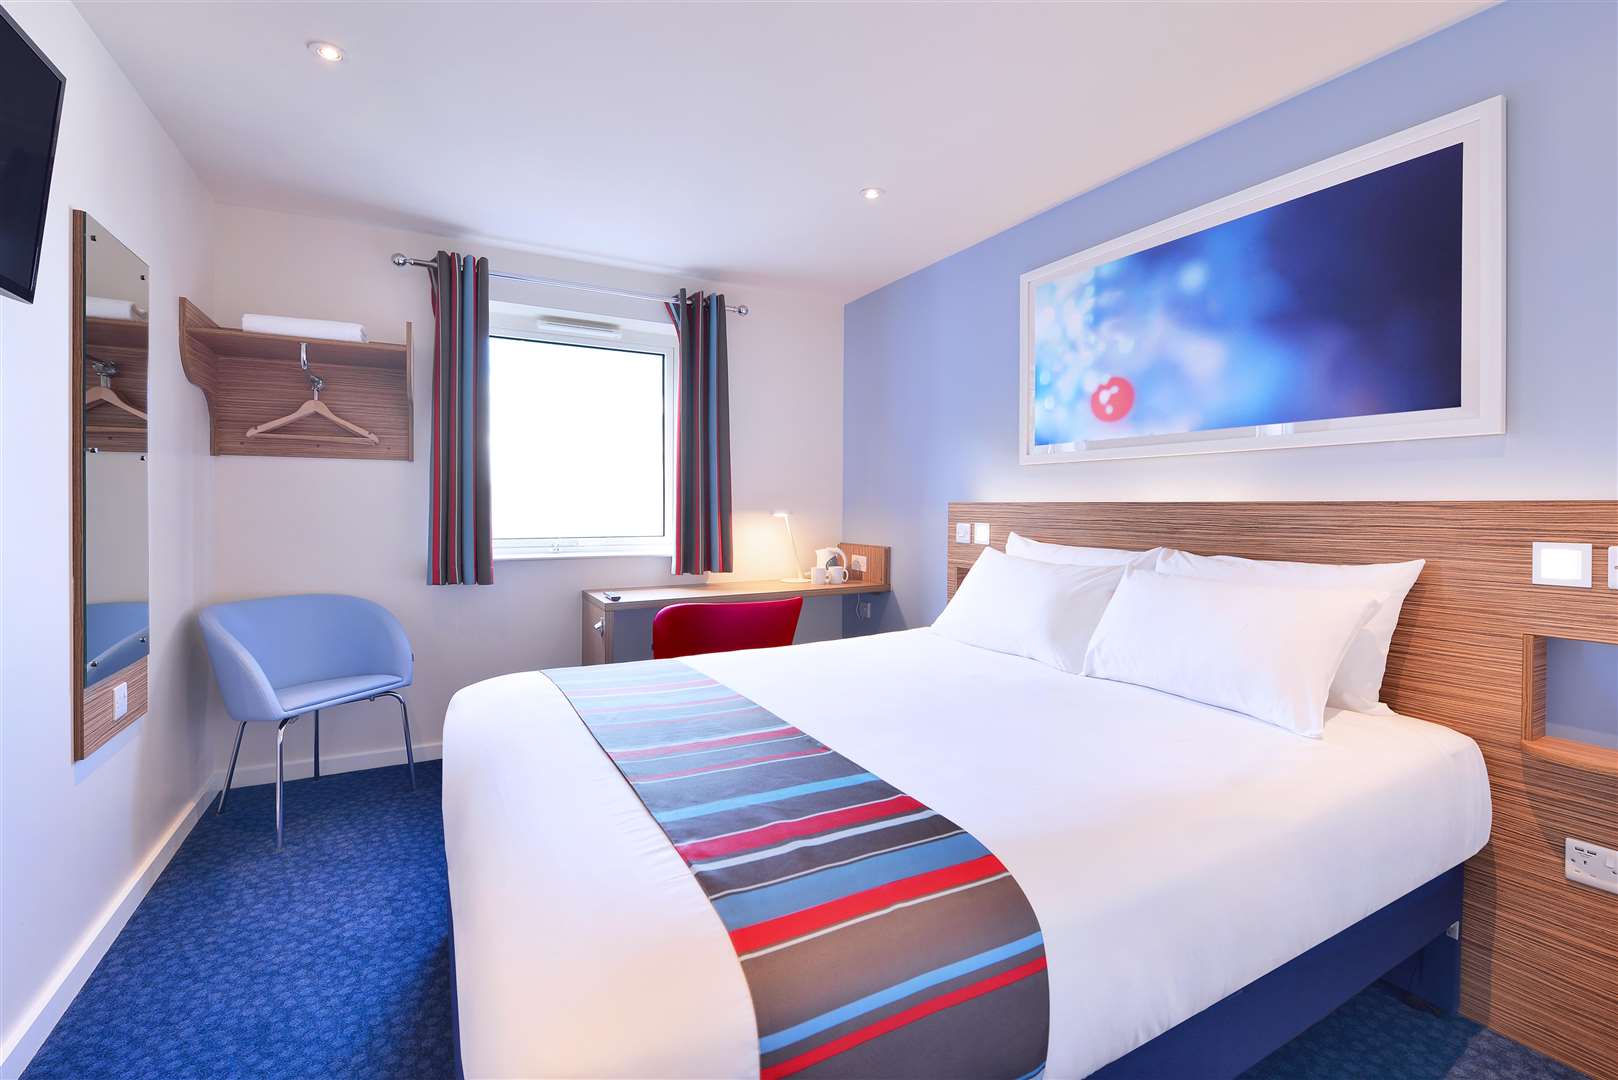 Travelodge wants to expand further with ten more Kent sites